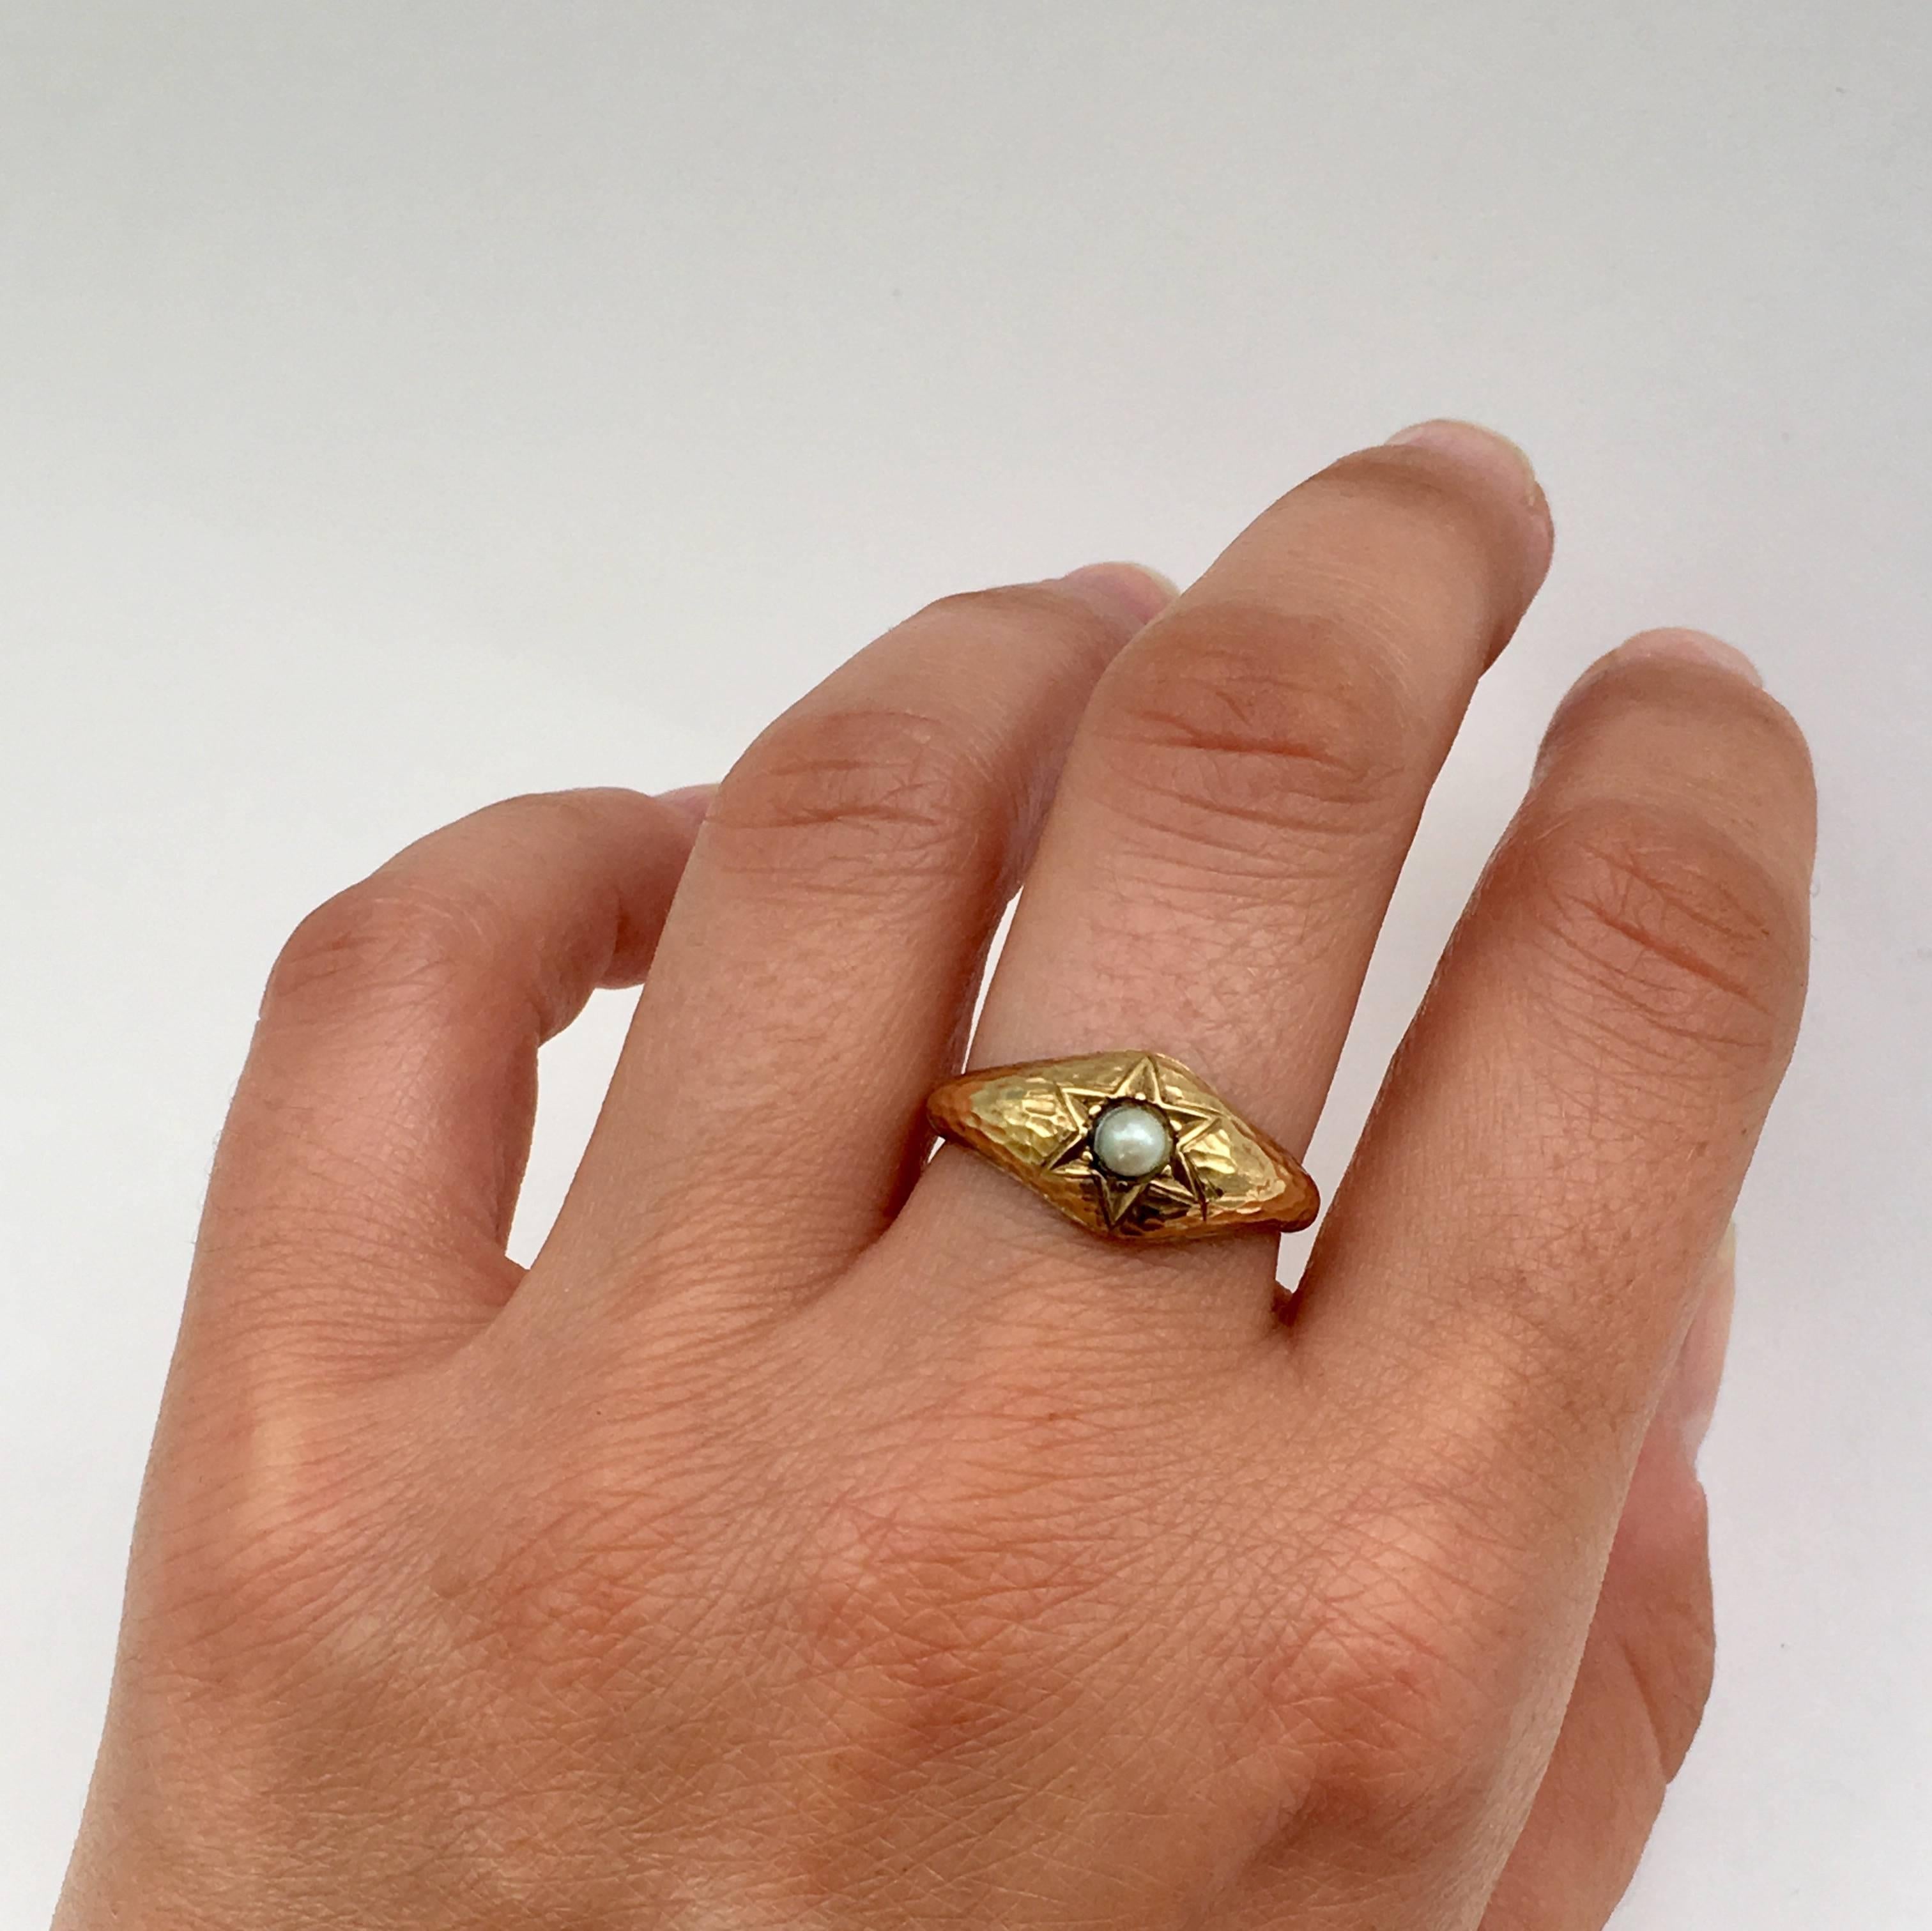 Pearl Ring Hammered Gold Antique Jewelry Vintage Star Signet Rings Celestial 5